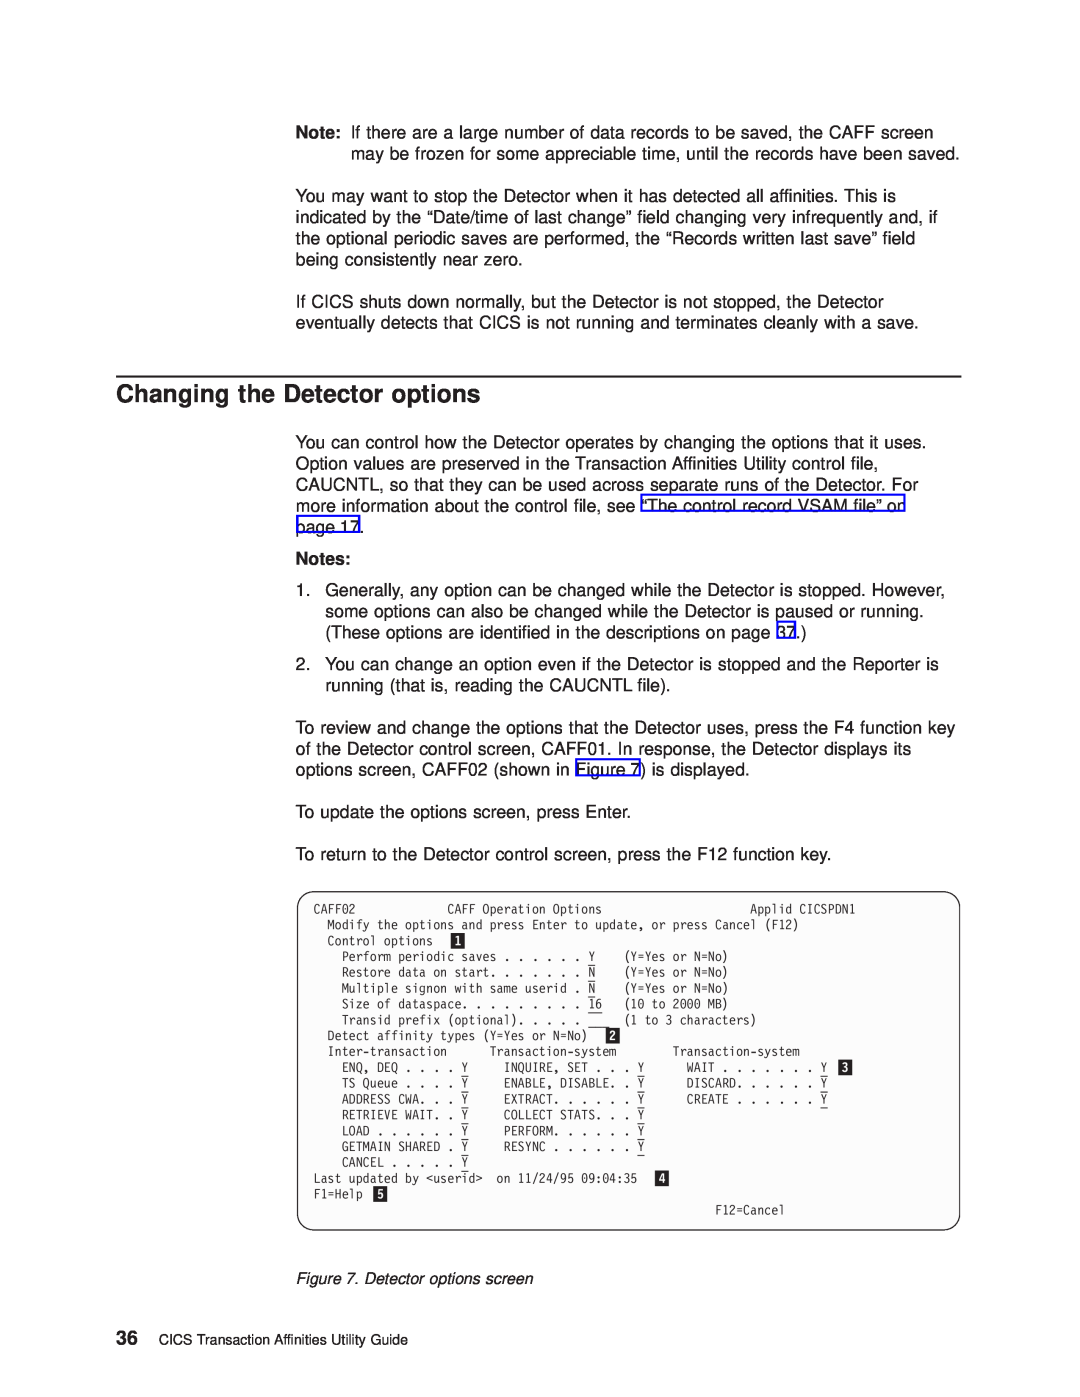 IBM OS manual Changing the Detector options 